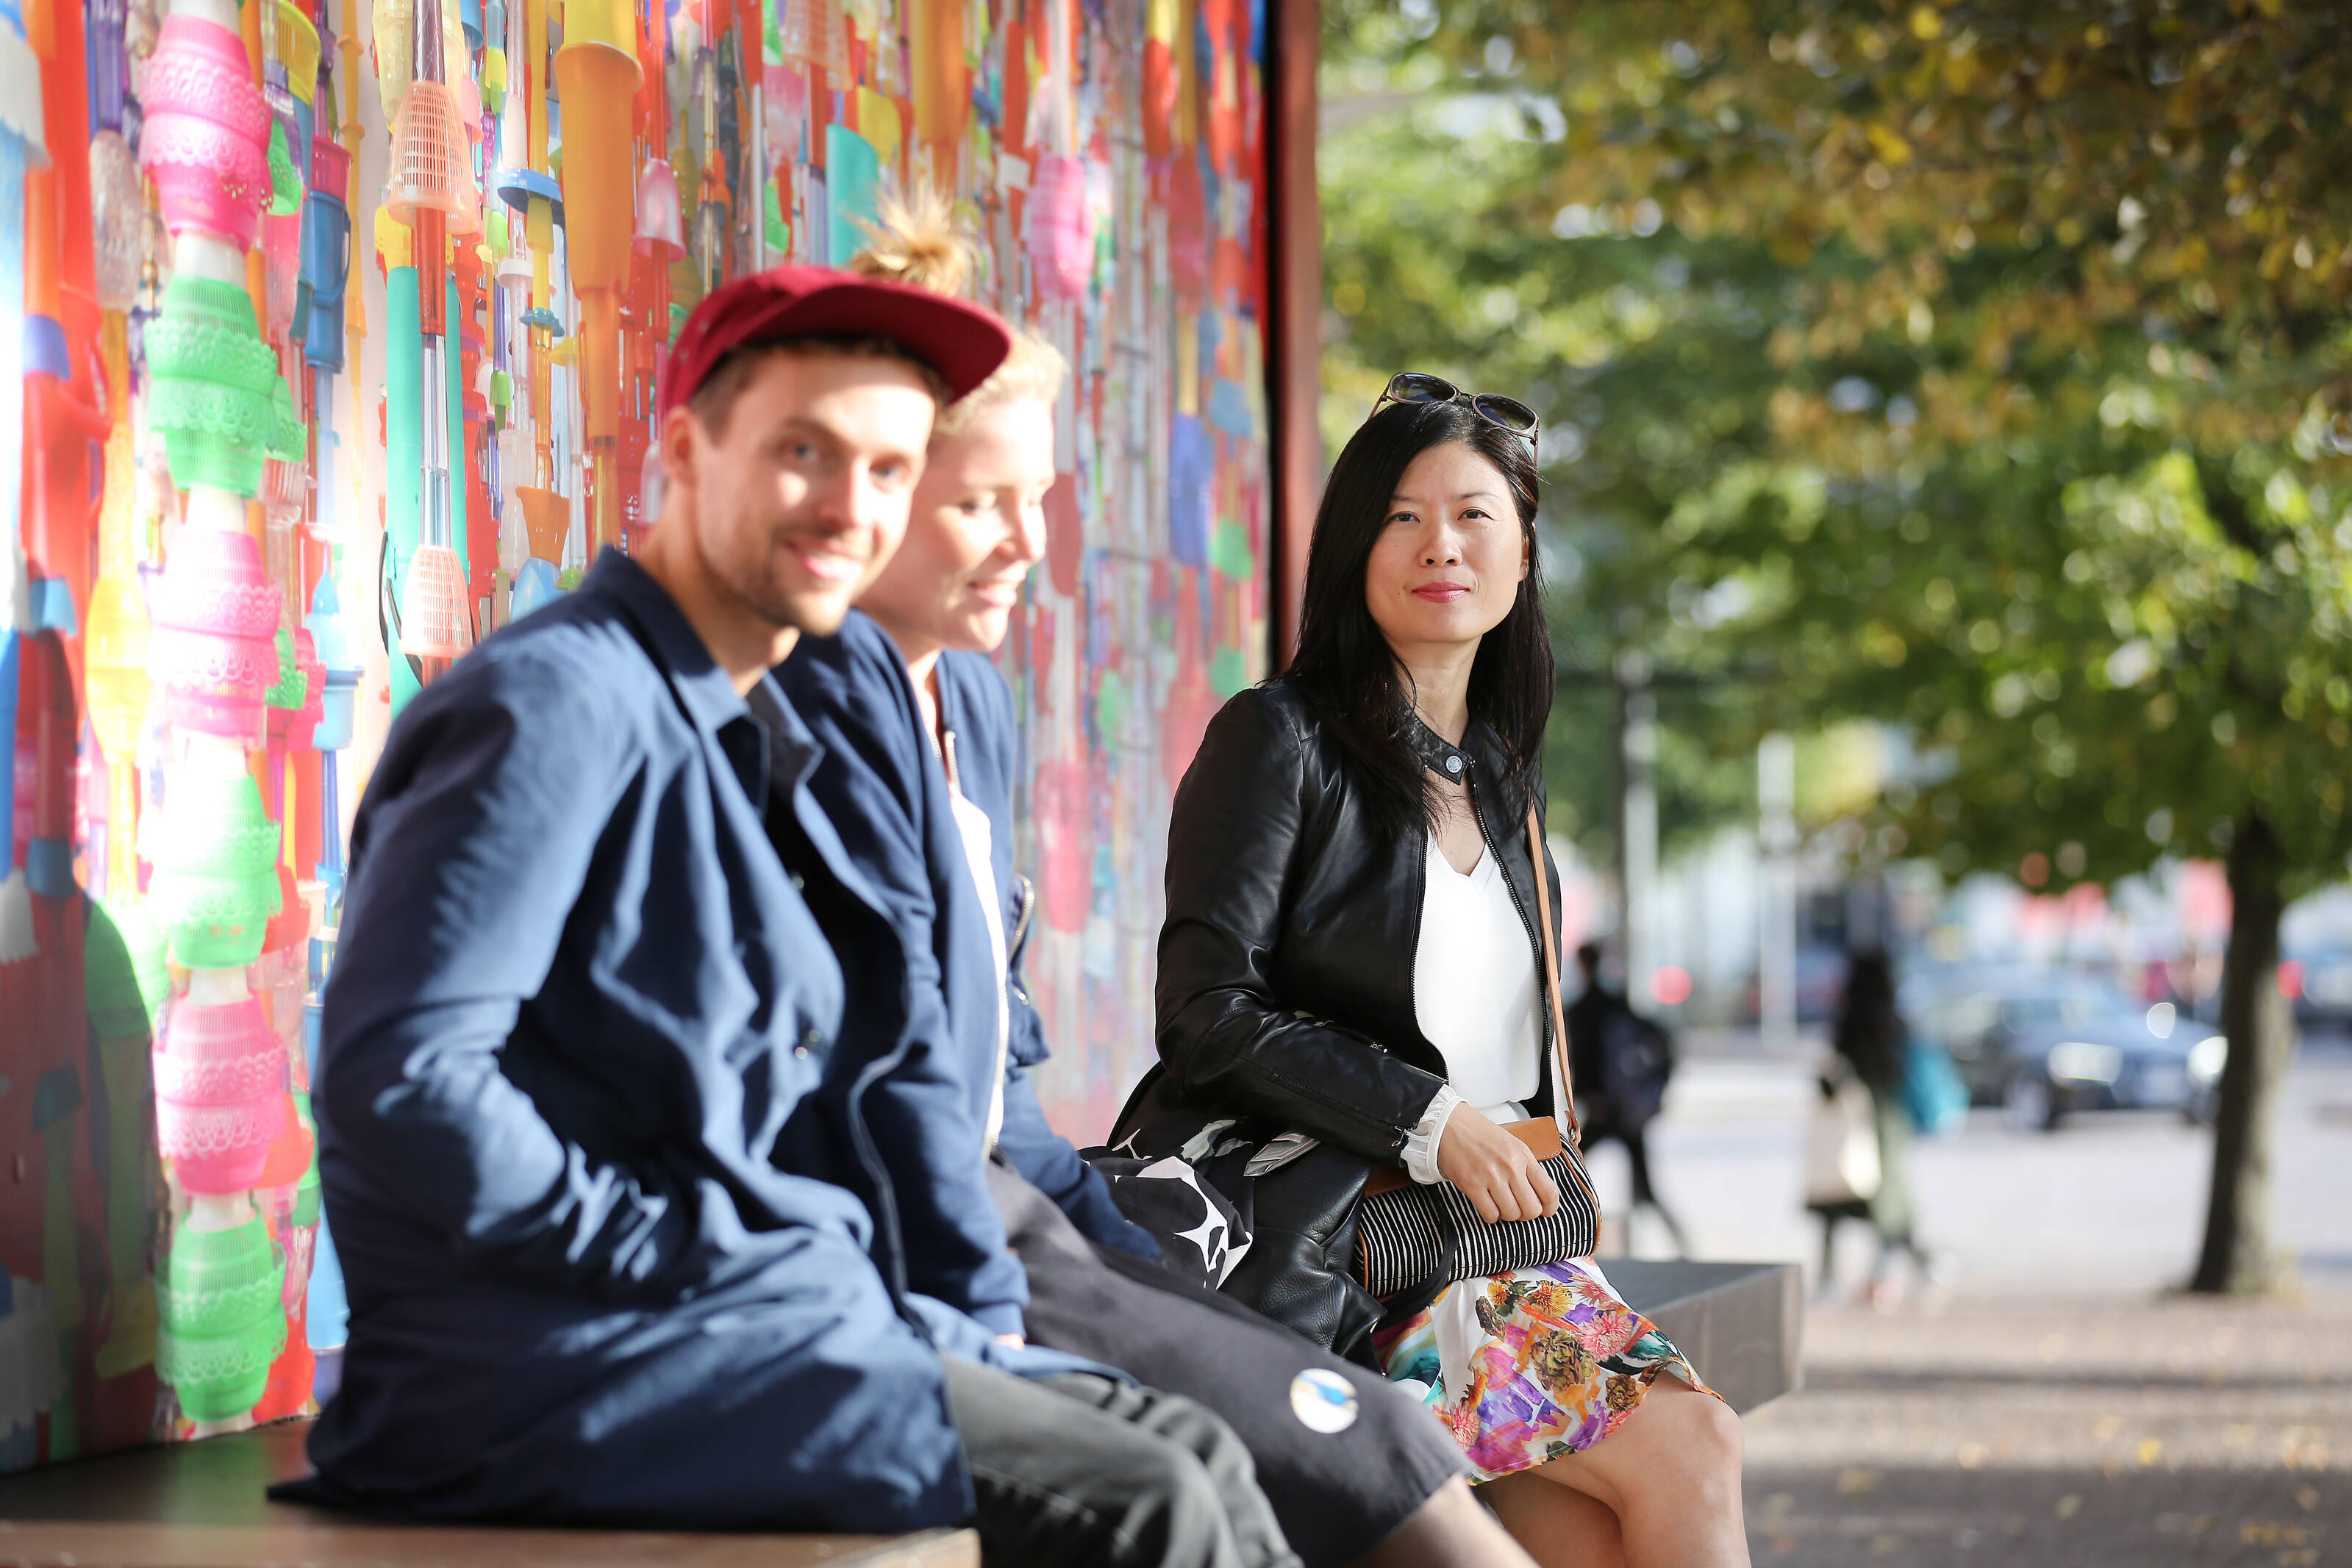 A man and two women sit outside in the sunshine by a colourful mural.